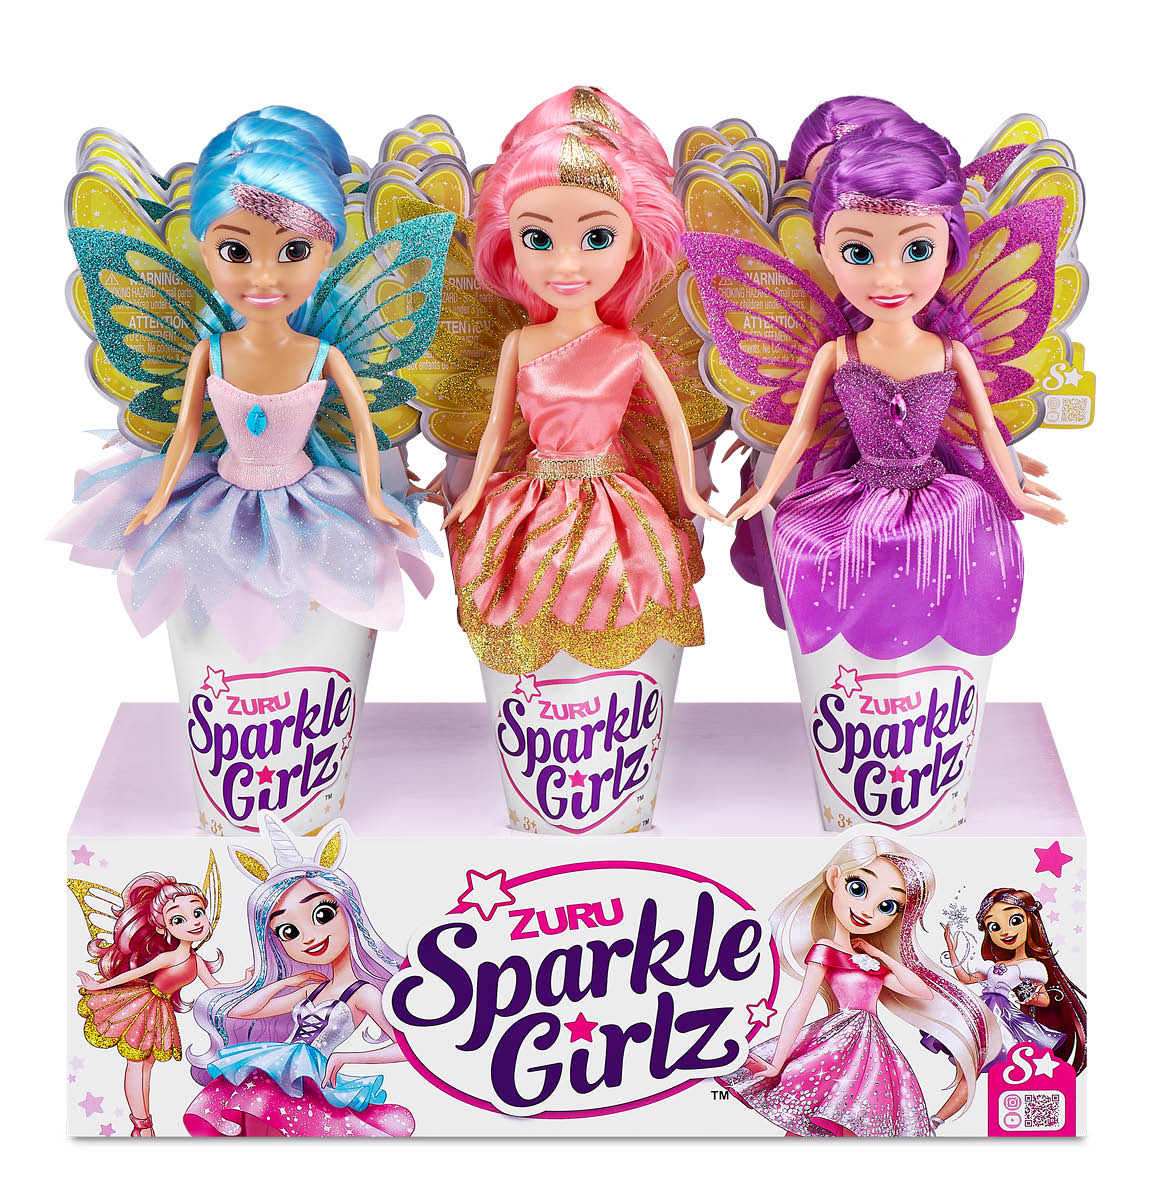 Sparkle Girlz Fairy Doll in Turquoise Outfit